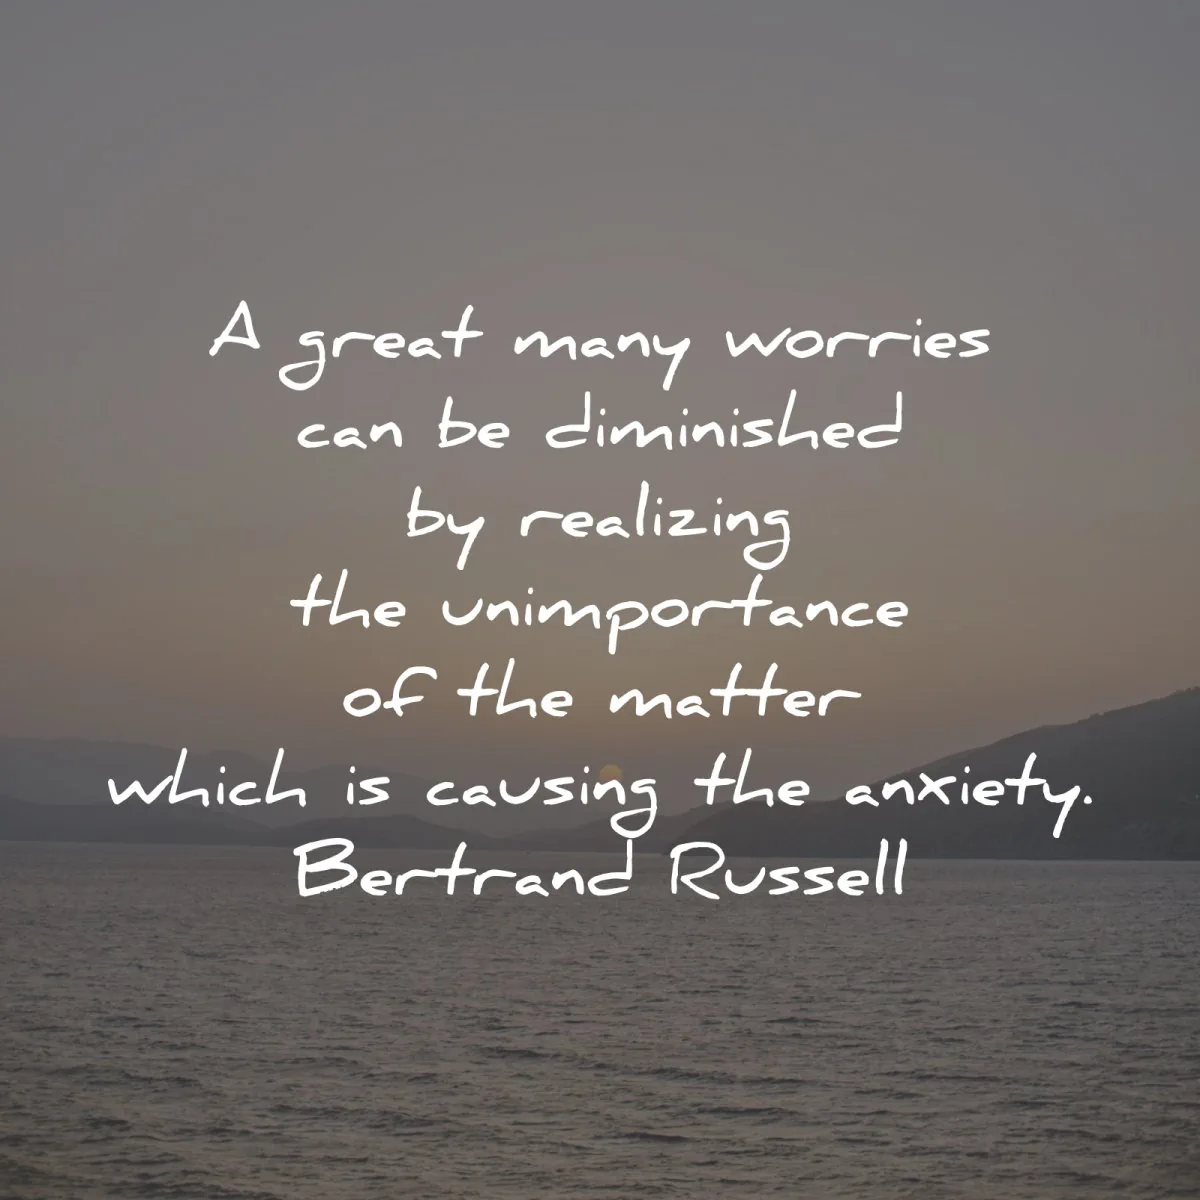 anxiety quotes worries diminished realizing bertrand russell wisdom